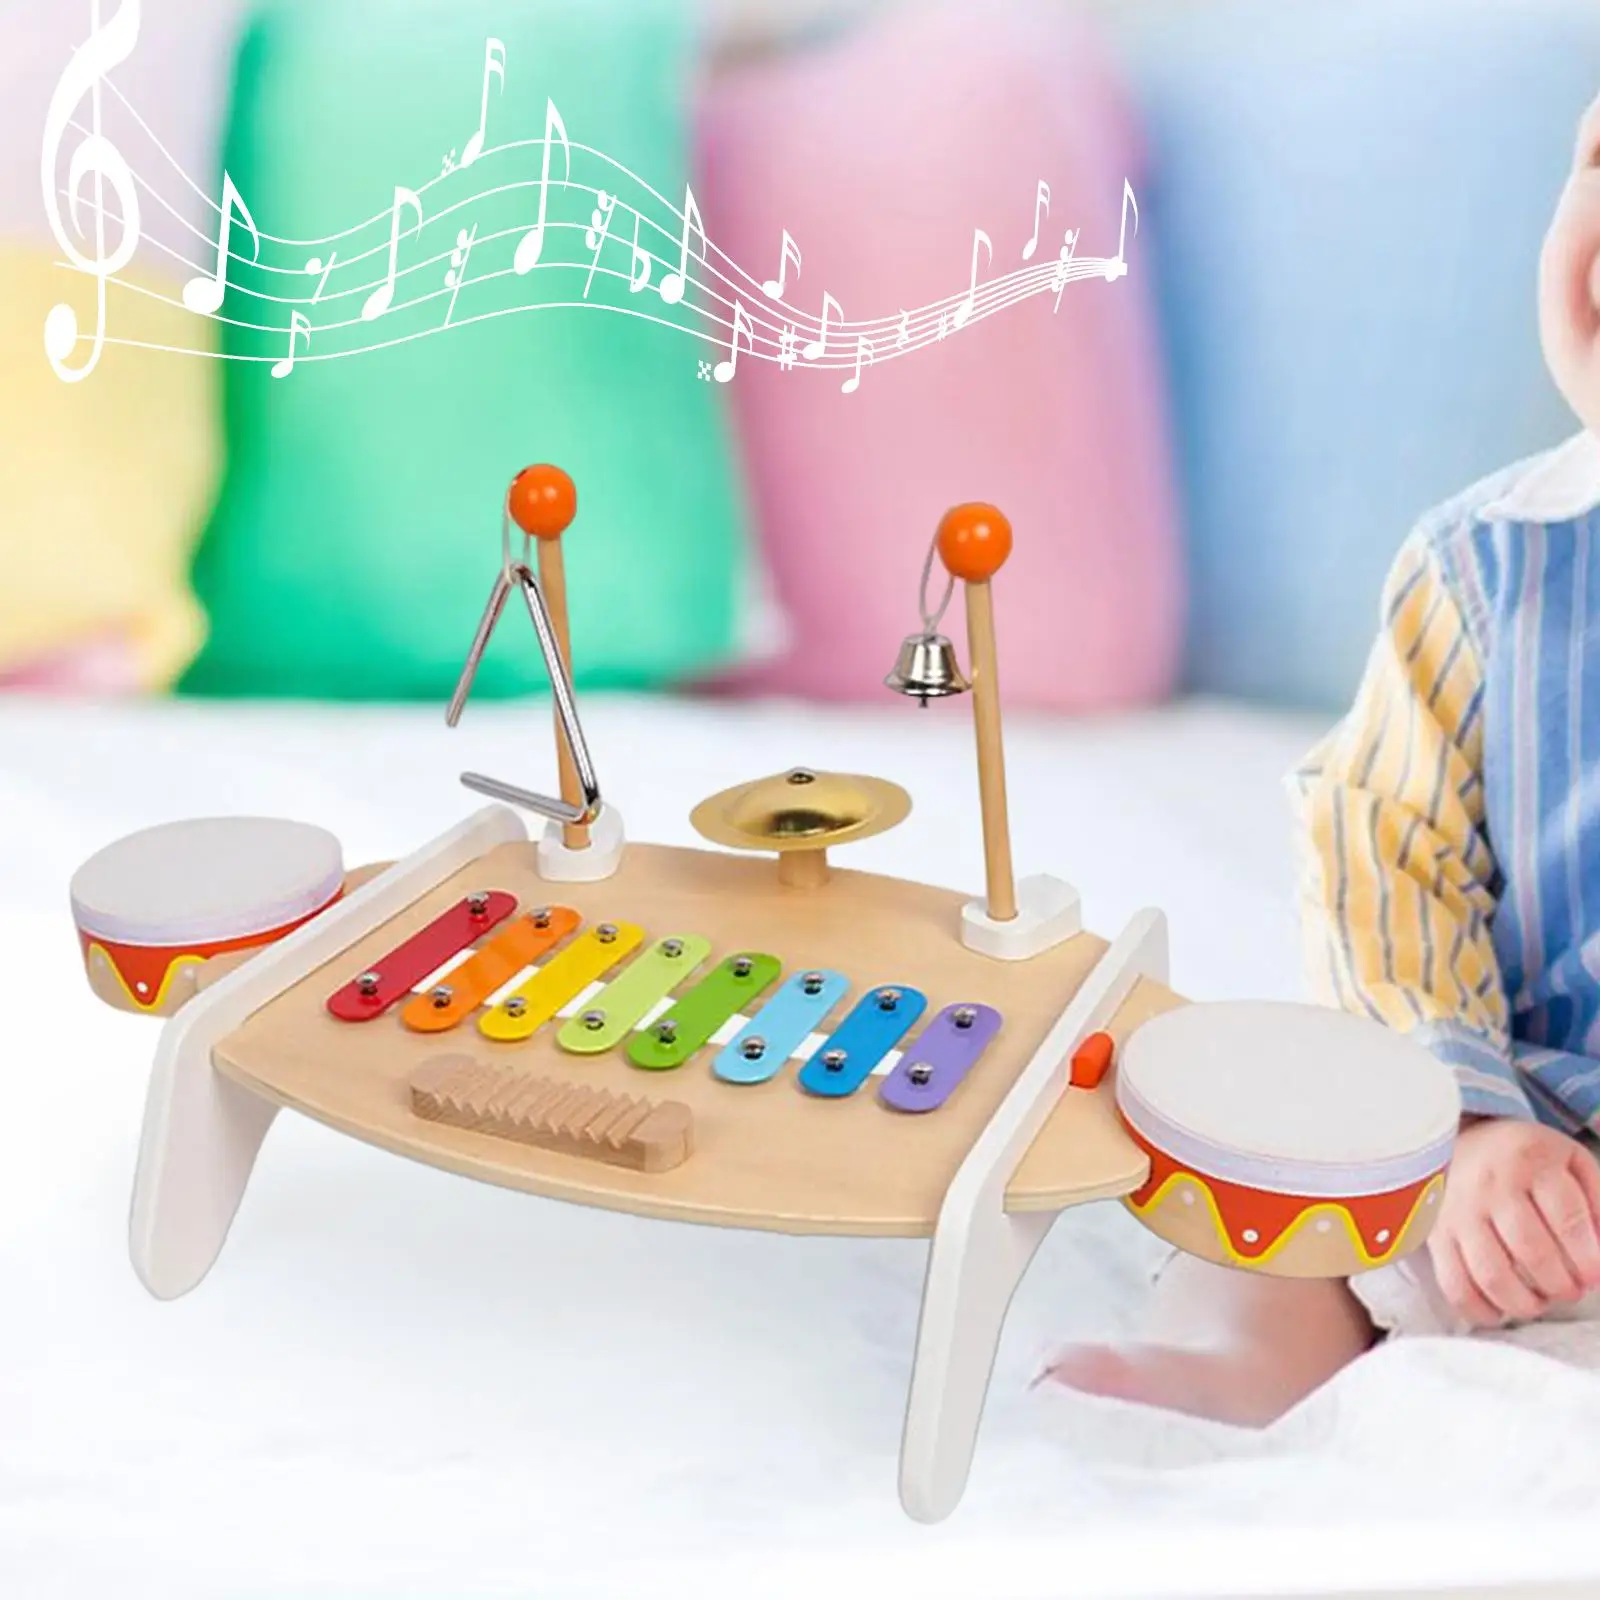 Multifunction Xylophone Toy Musical Instruments Montessori Toy Sensory Musical Toy for Boys Kids Girls Children Birthday Gift